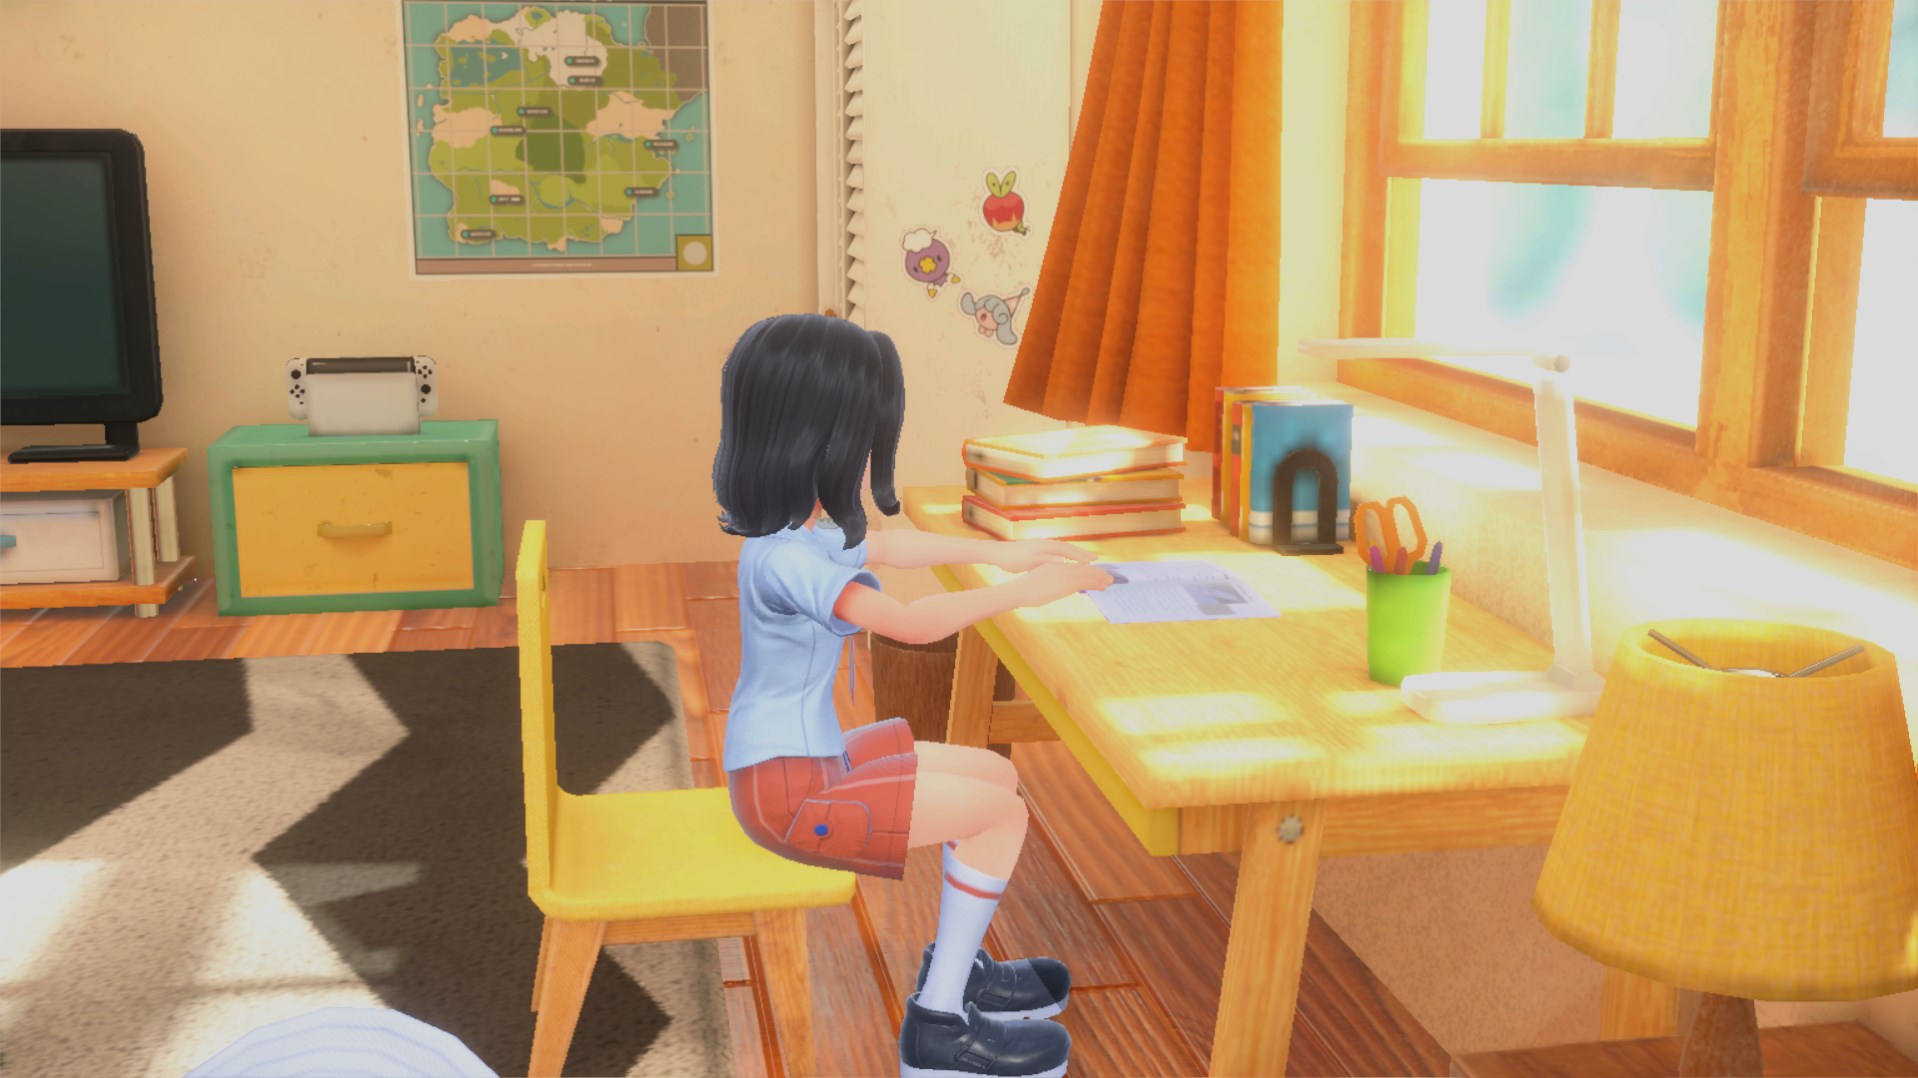 A Pokémon trainer in the Naranja Academy uniform sitting at a desk at home